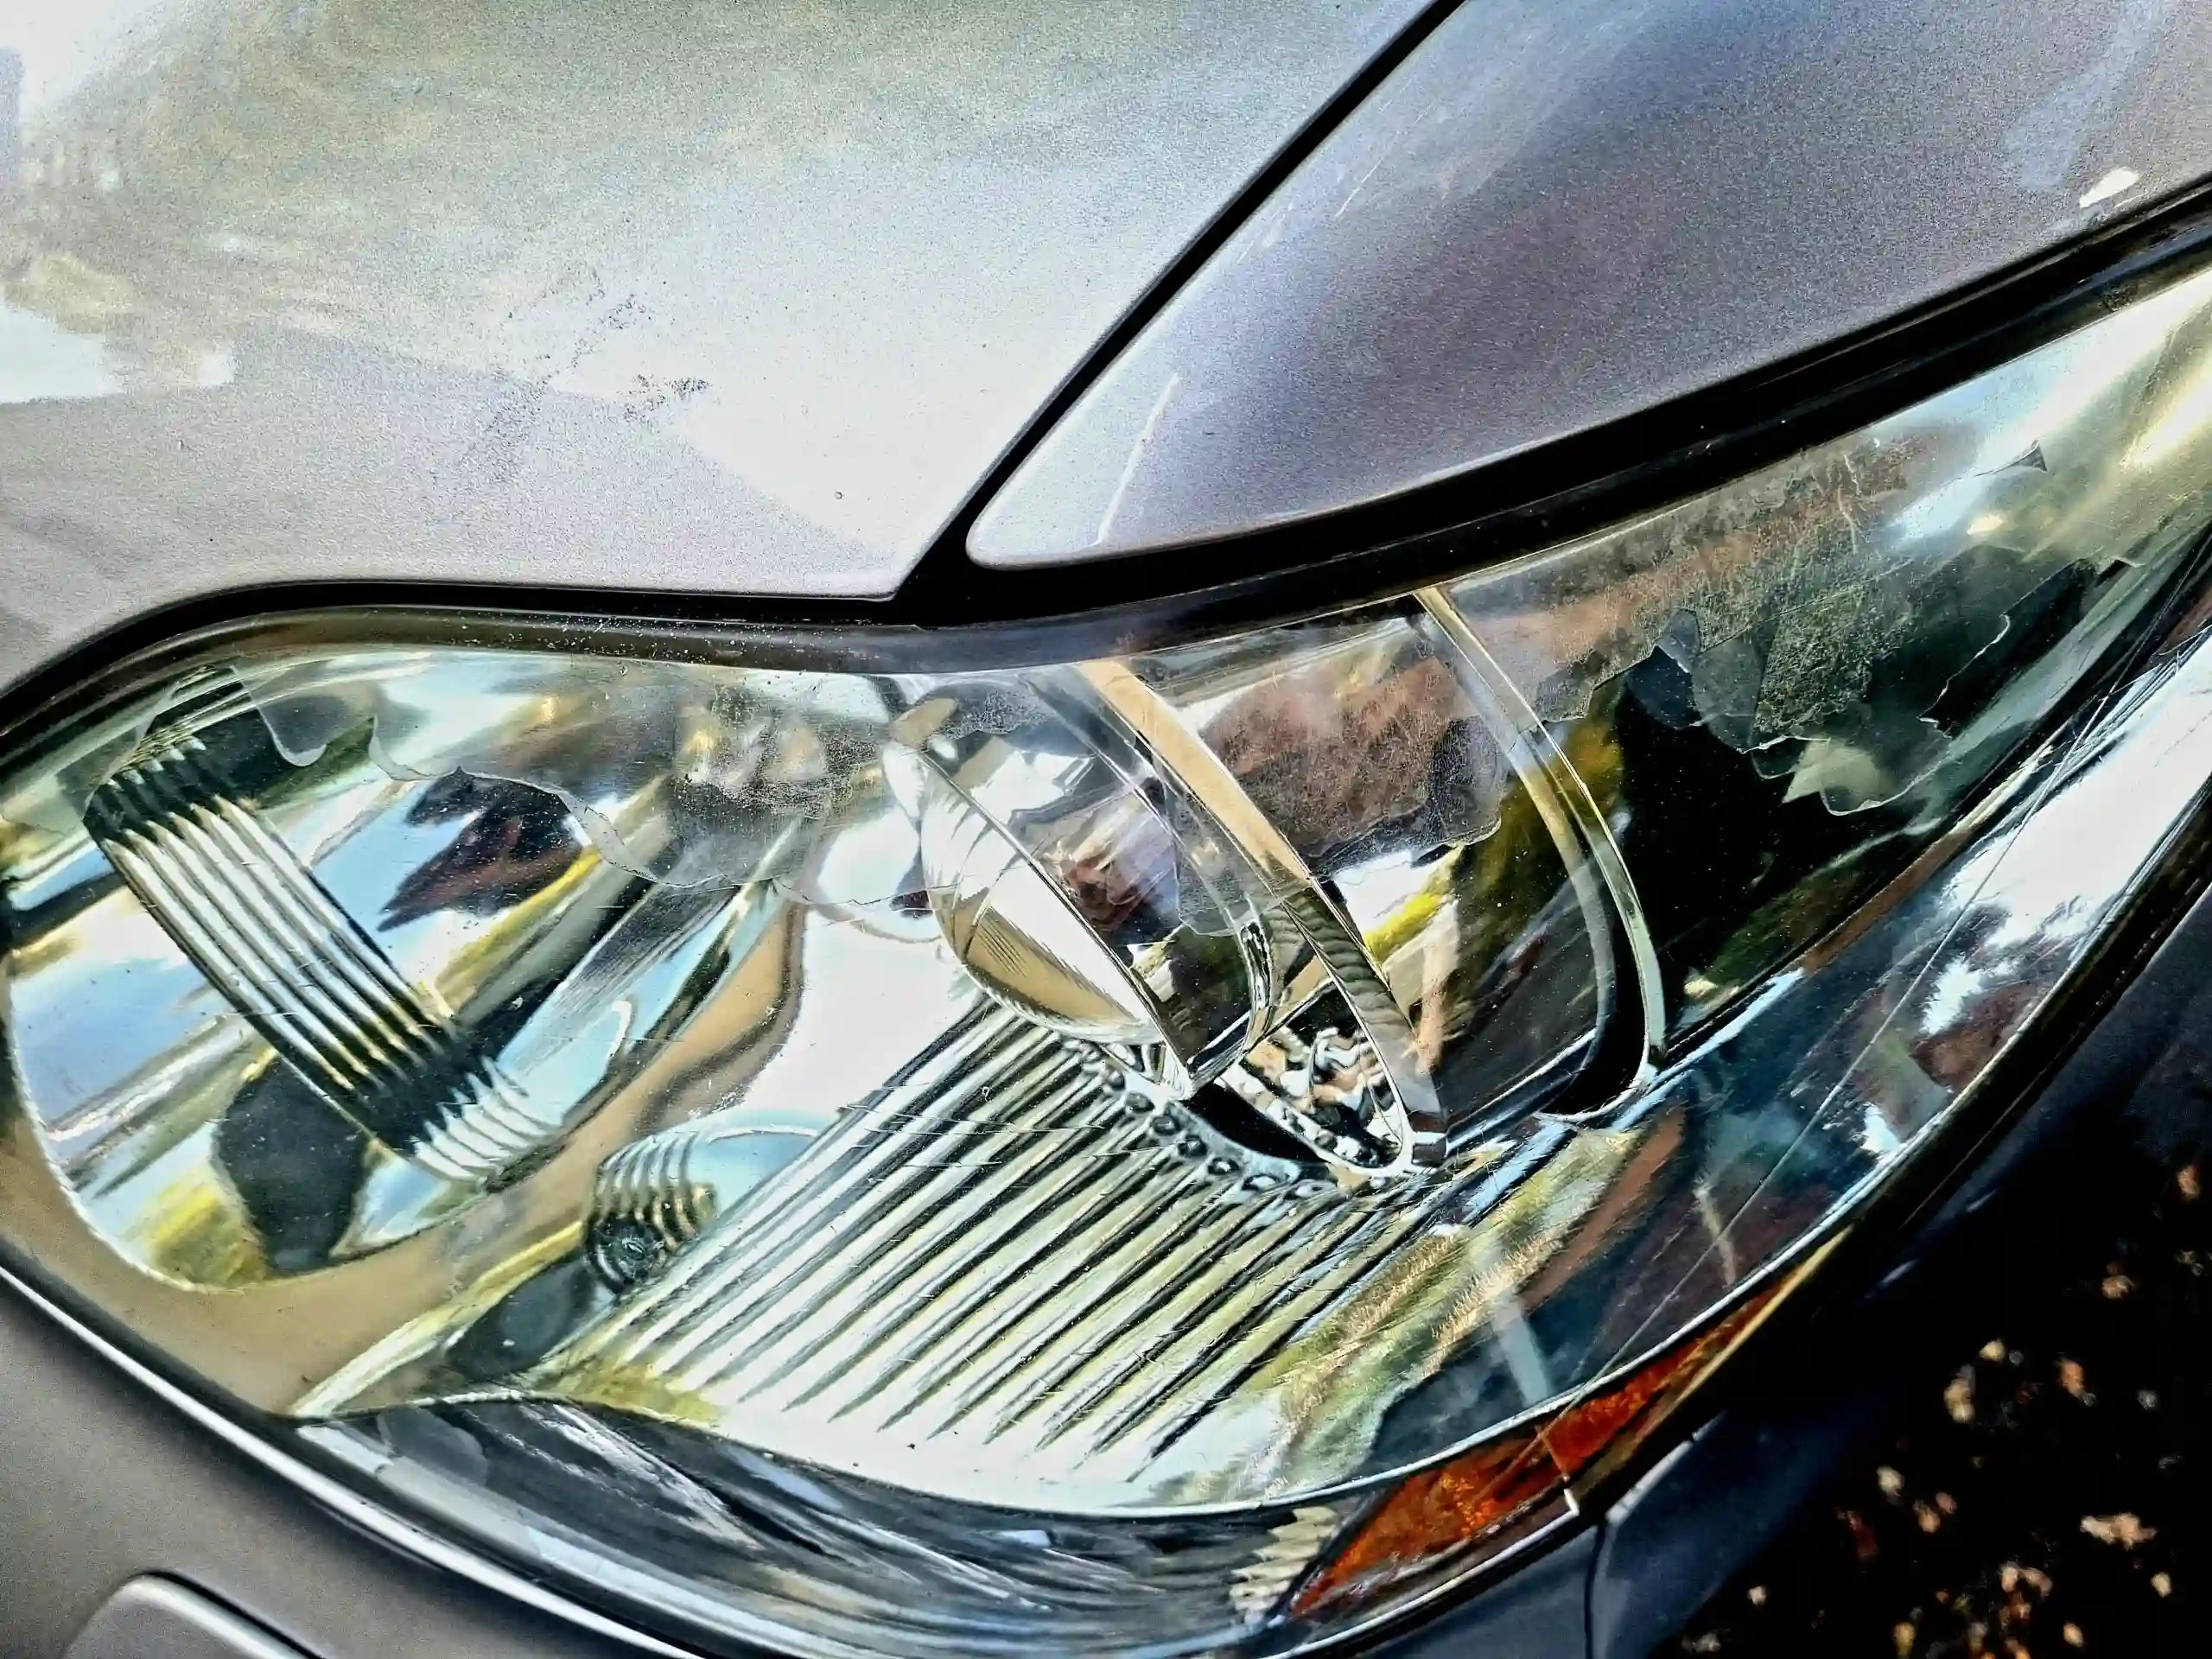 Best Clear Coat for Headlight in 2022 - Top 6 Review for Sun Damaged  Headlights, Surface Activator 